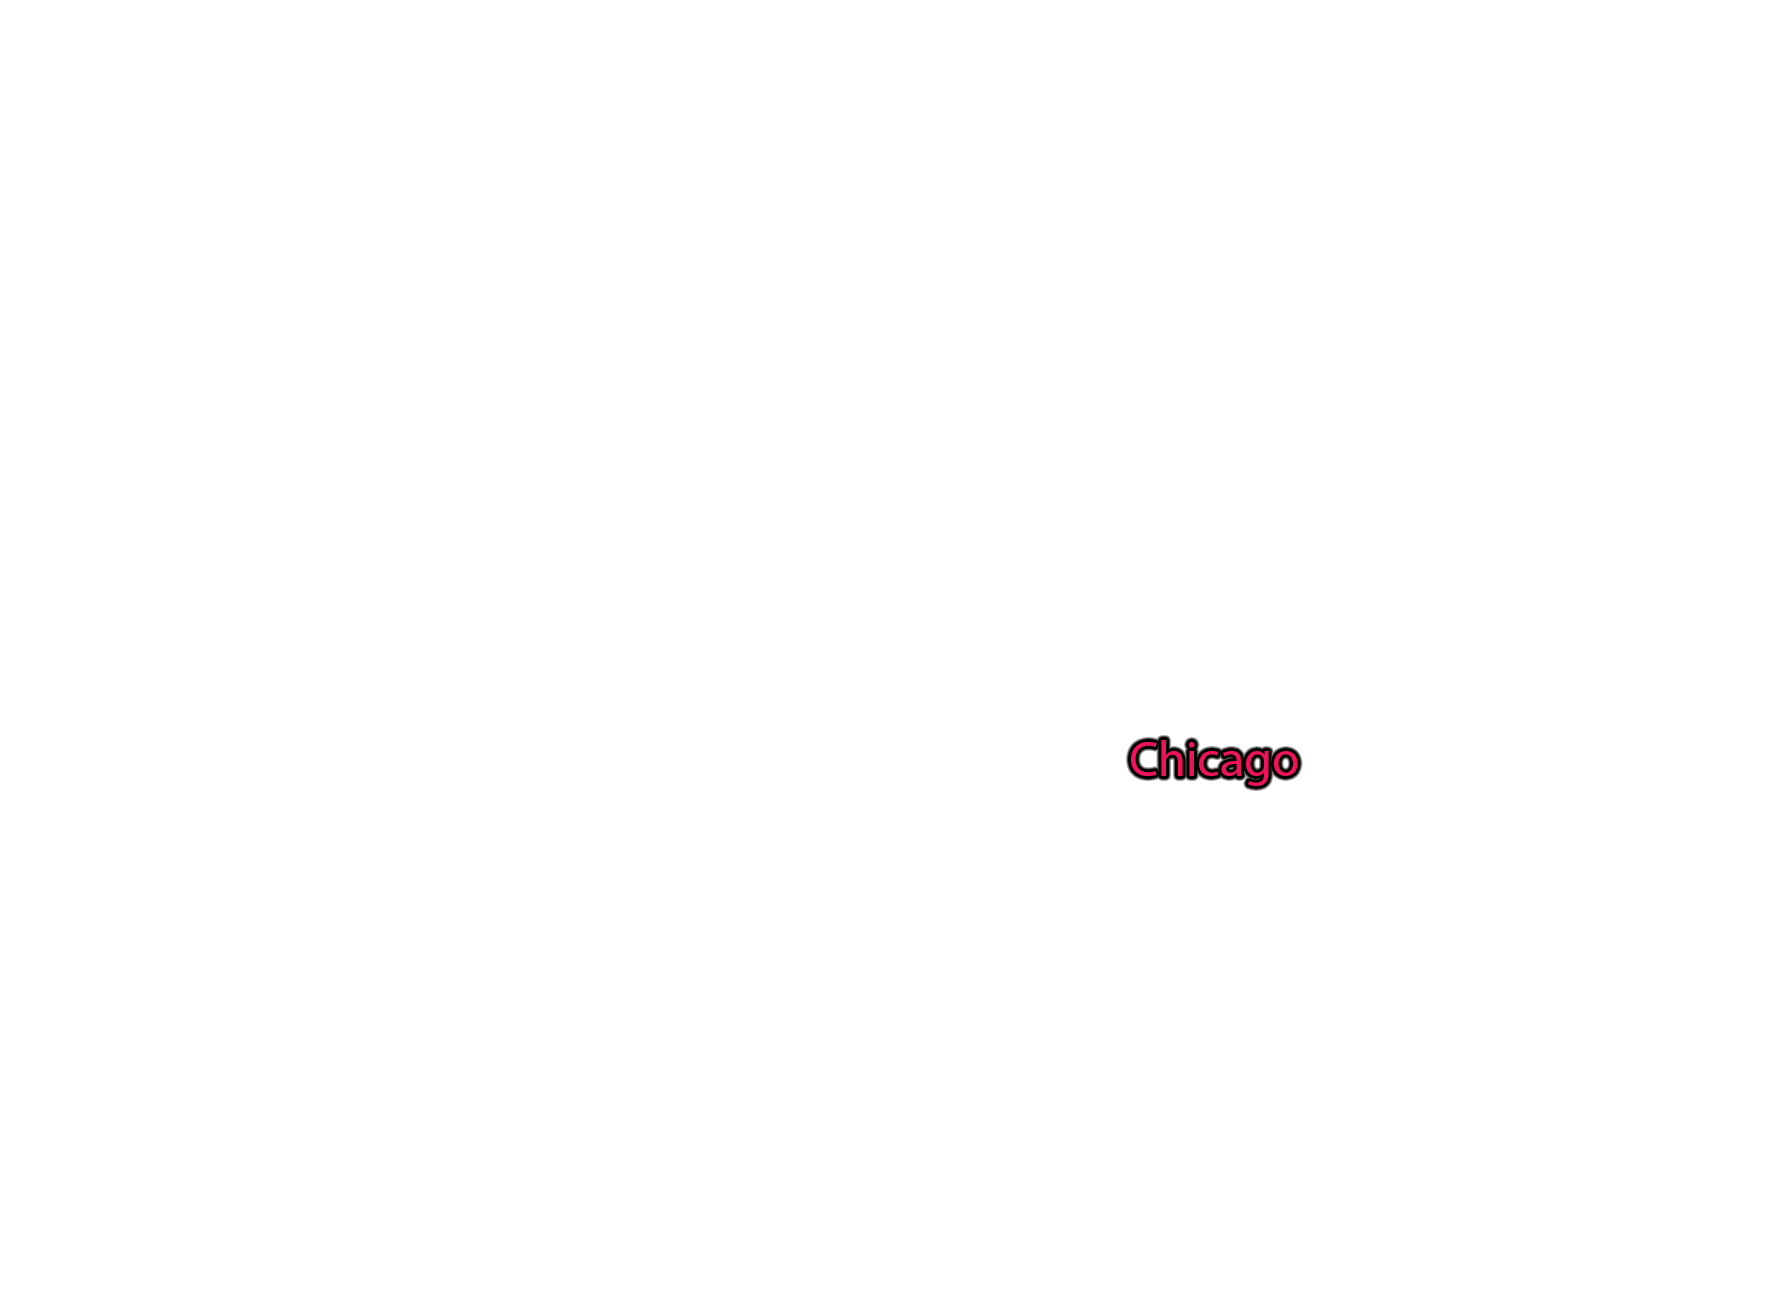 Chicago label with glow